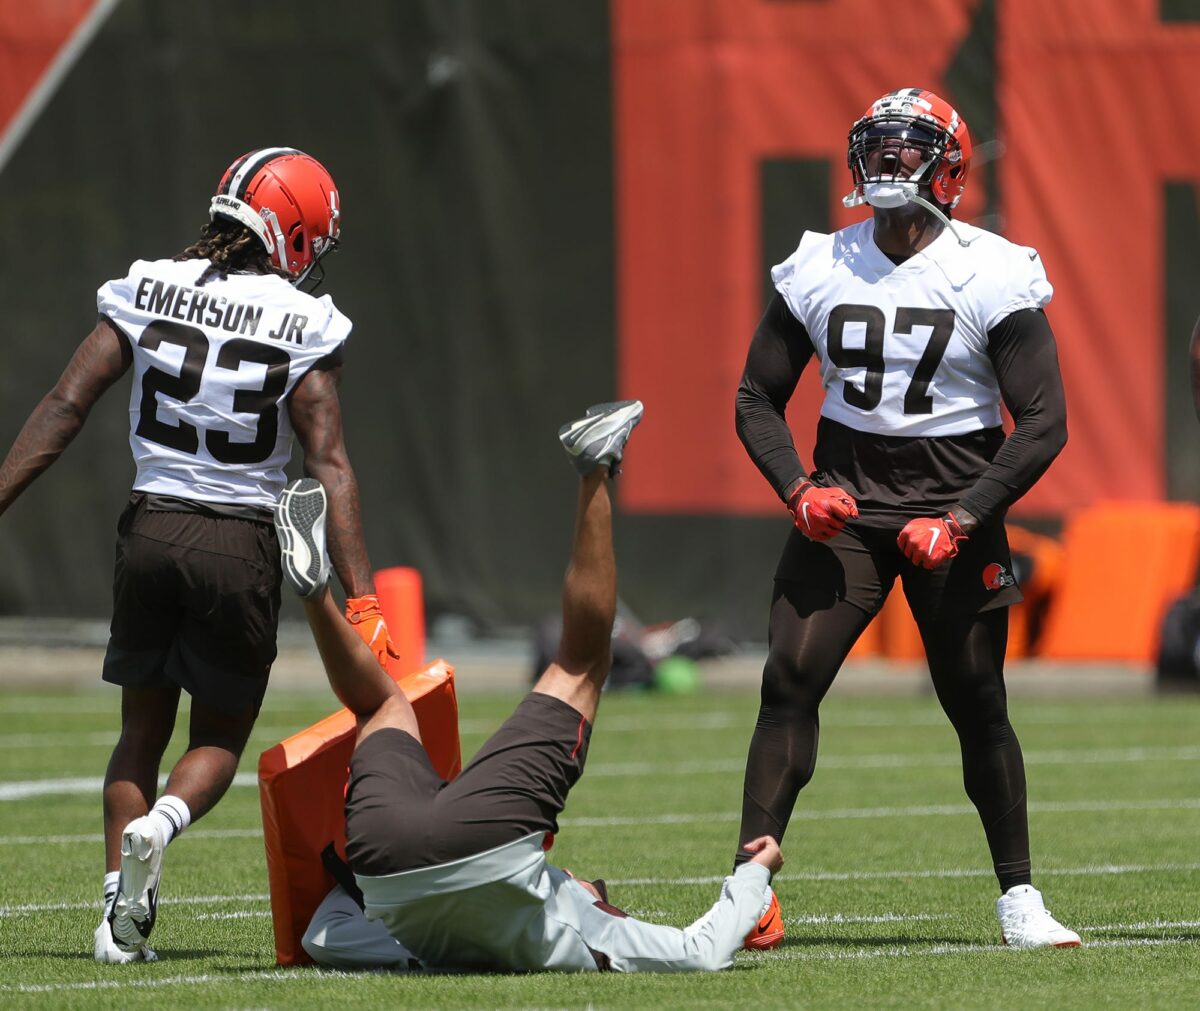 Browns begin to report to training camp on Friday